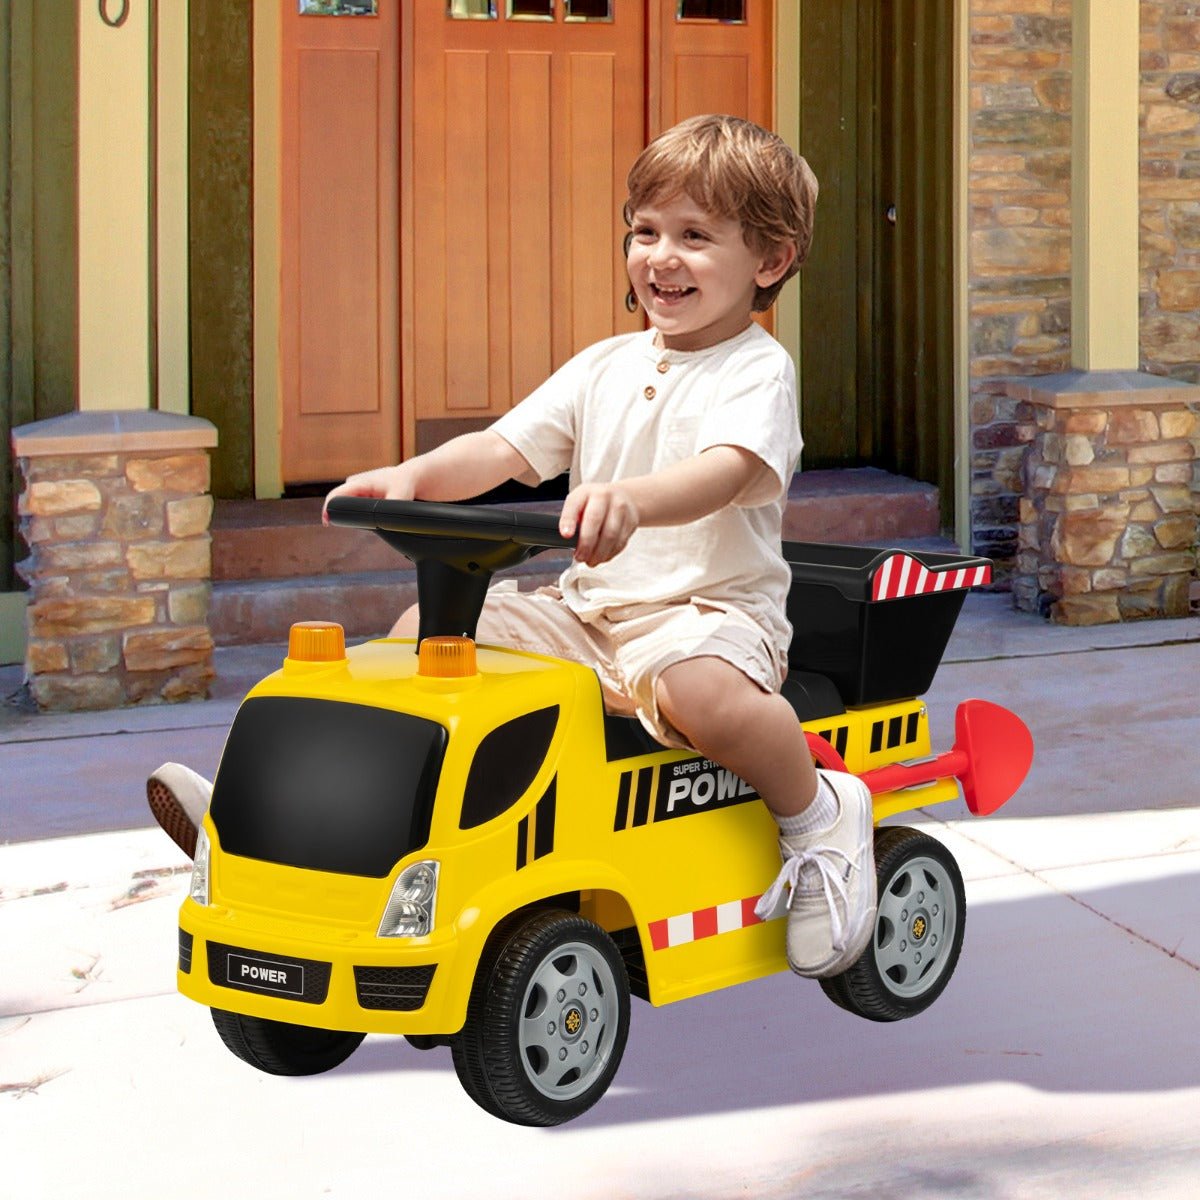 Shop the Yellow Ride-On Toy Truck with Siren Sound at Kids Mega Mart